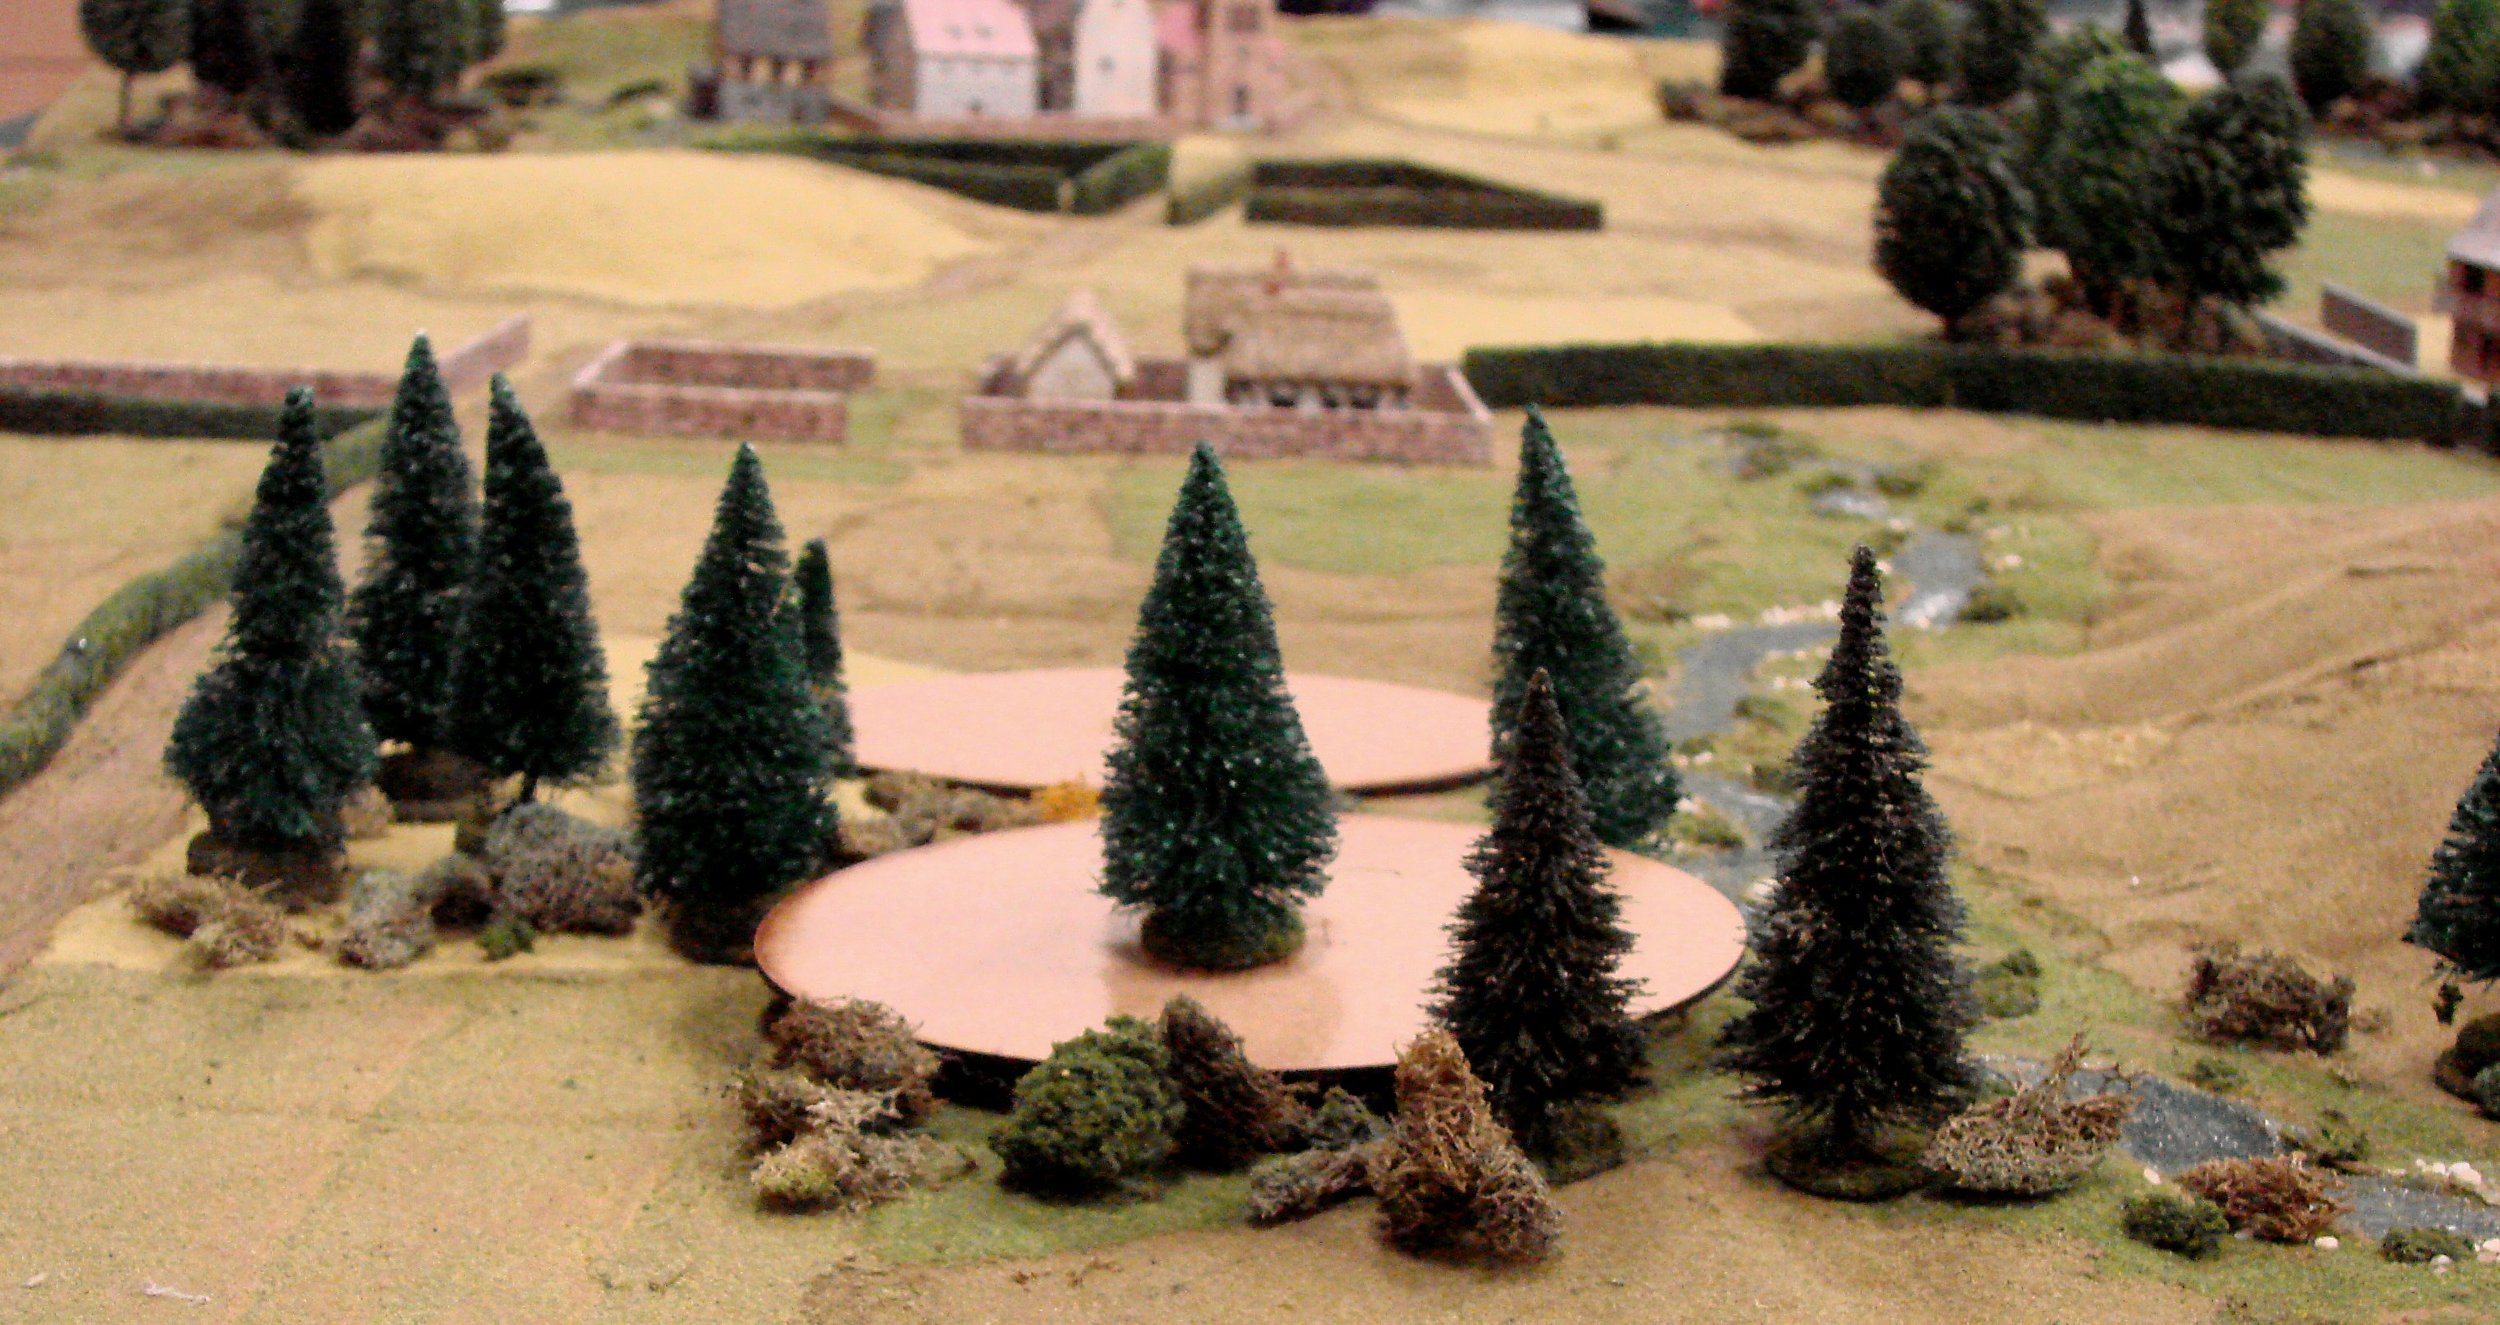 The Germans enter through the woods on blinds, one of the players cleverly disguising an approaching platoon by placing a tree on top of it. The Americans were not fooled.